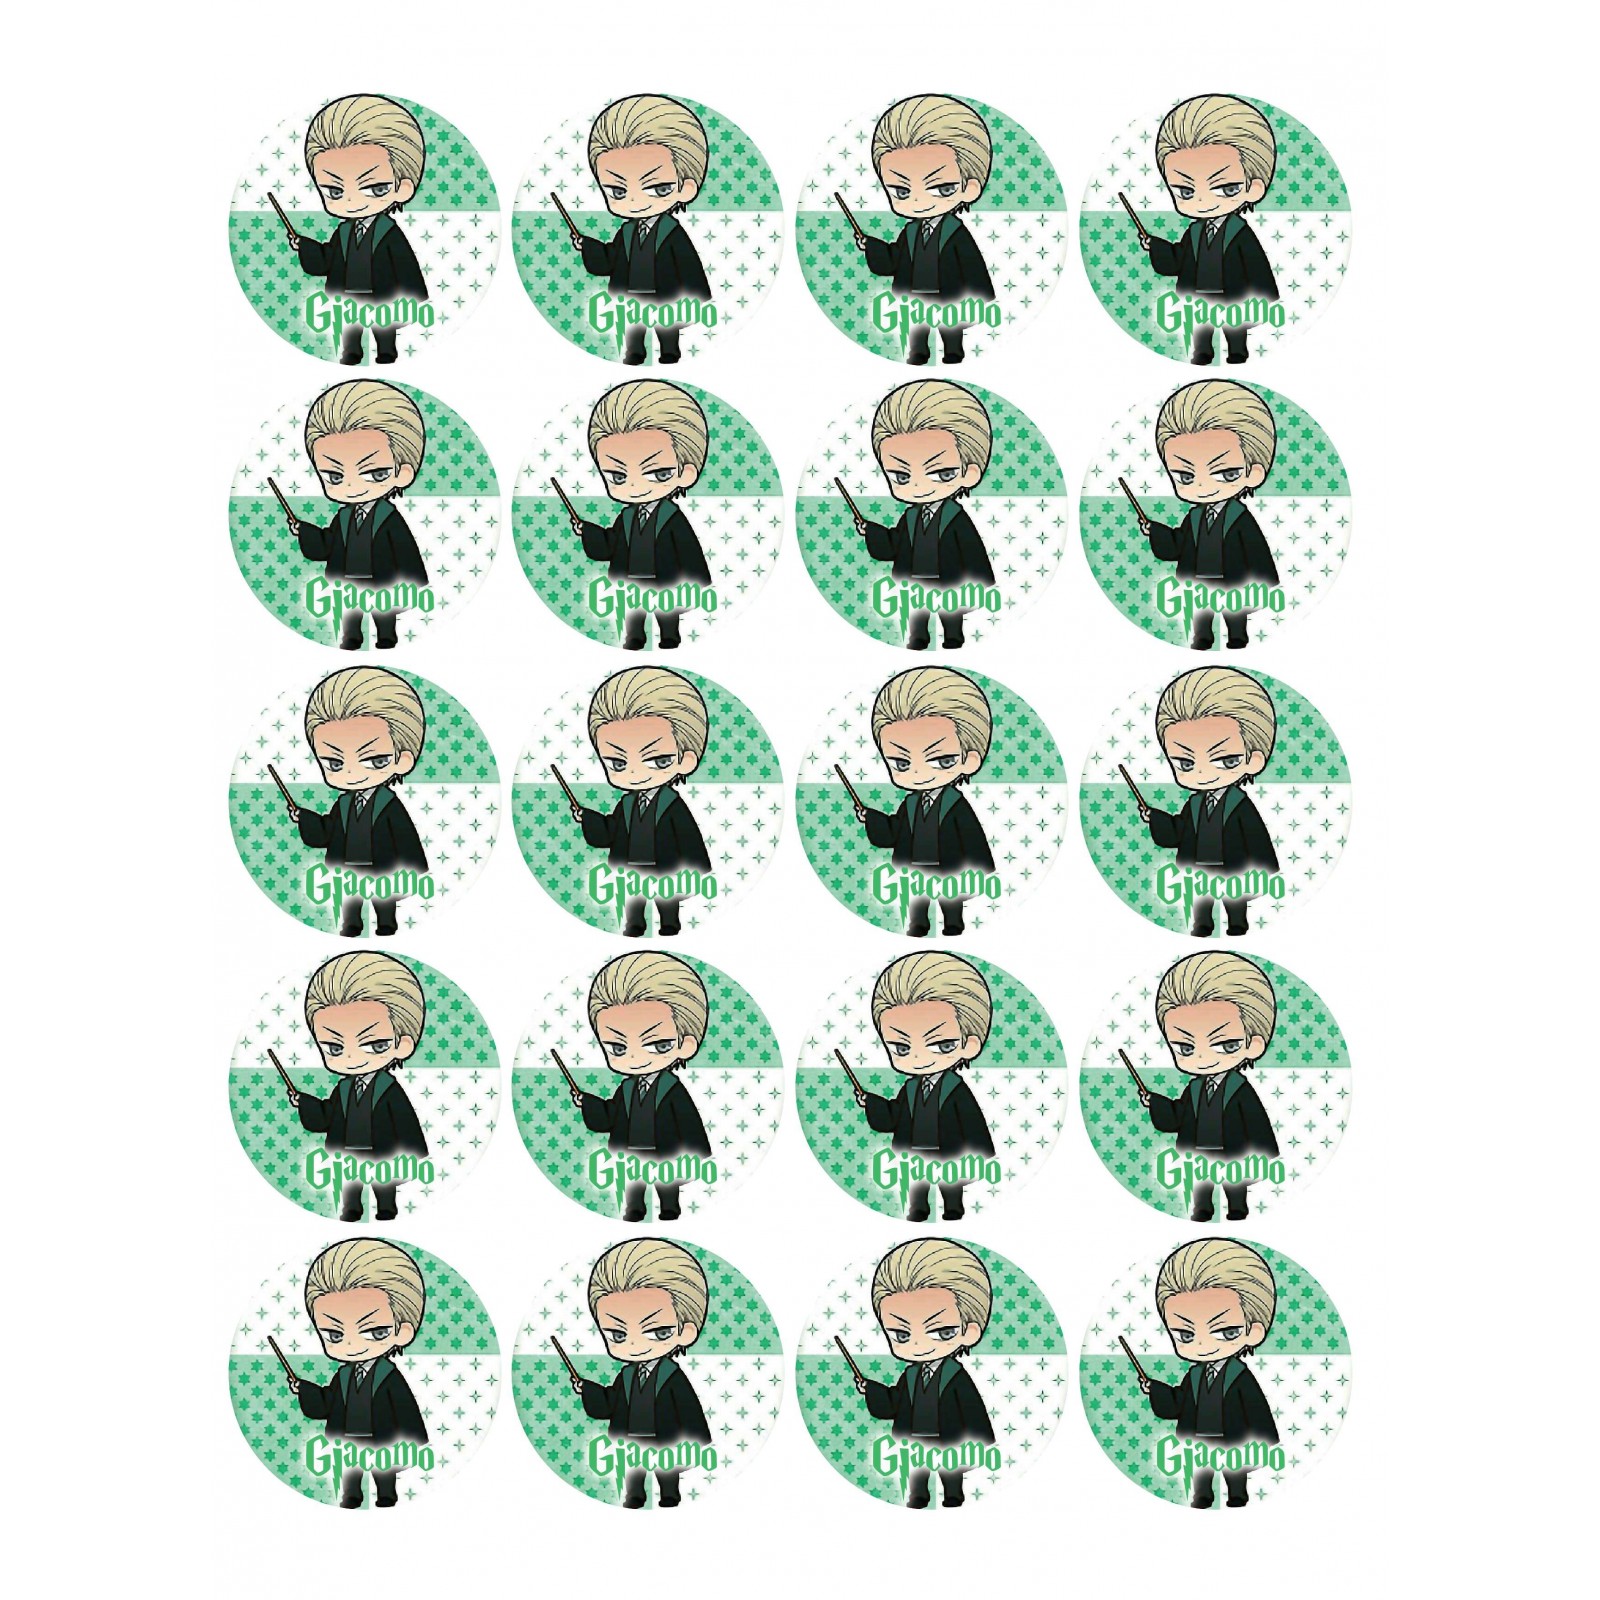 https://cake-me-up.com/346-thickbox_default/-DRACO-MALFOY-HARRY-POTTER-SERPEVERDE-CIALDA-PER-BISCOTTI-MUFFIN-CUPCAKE-052CB.jpg